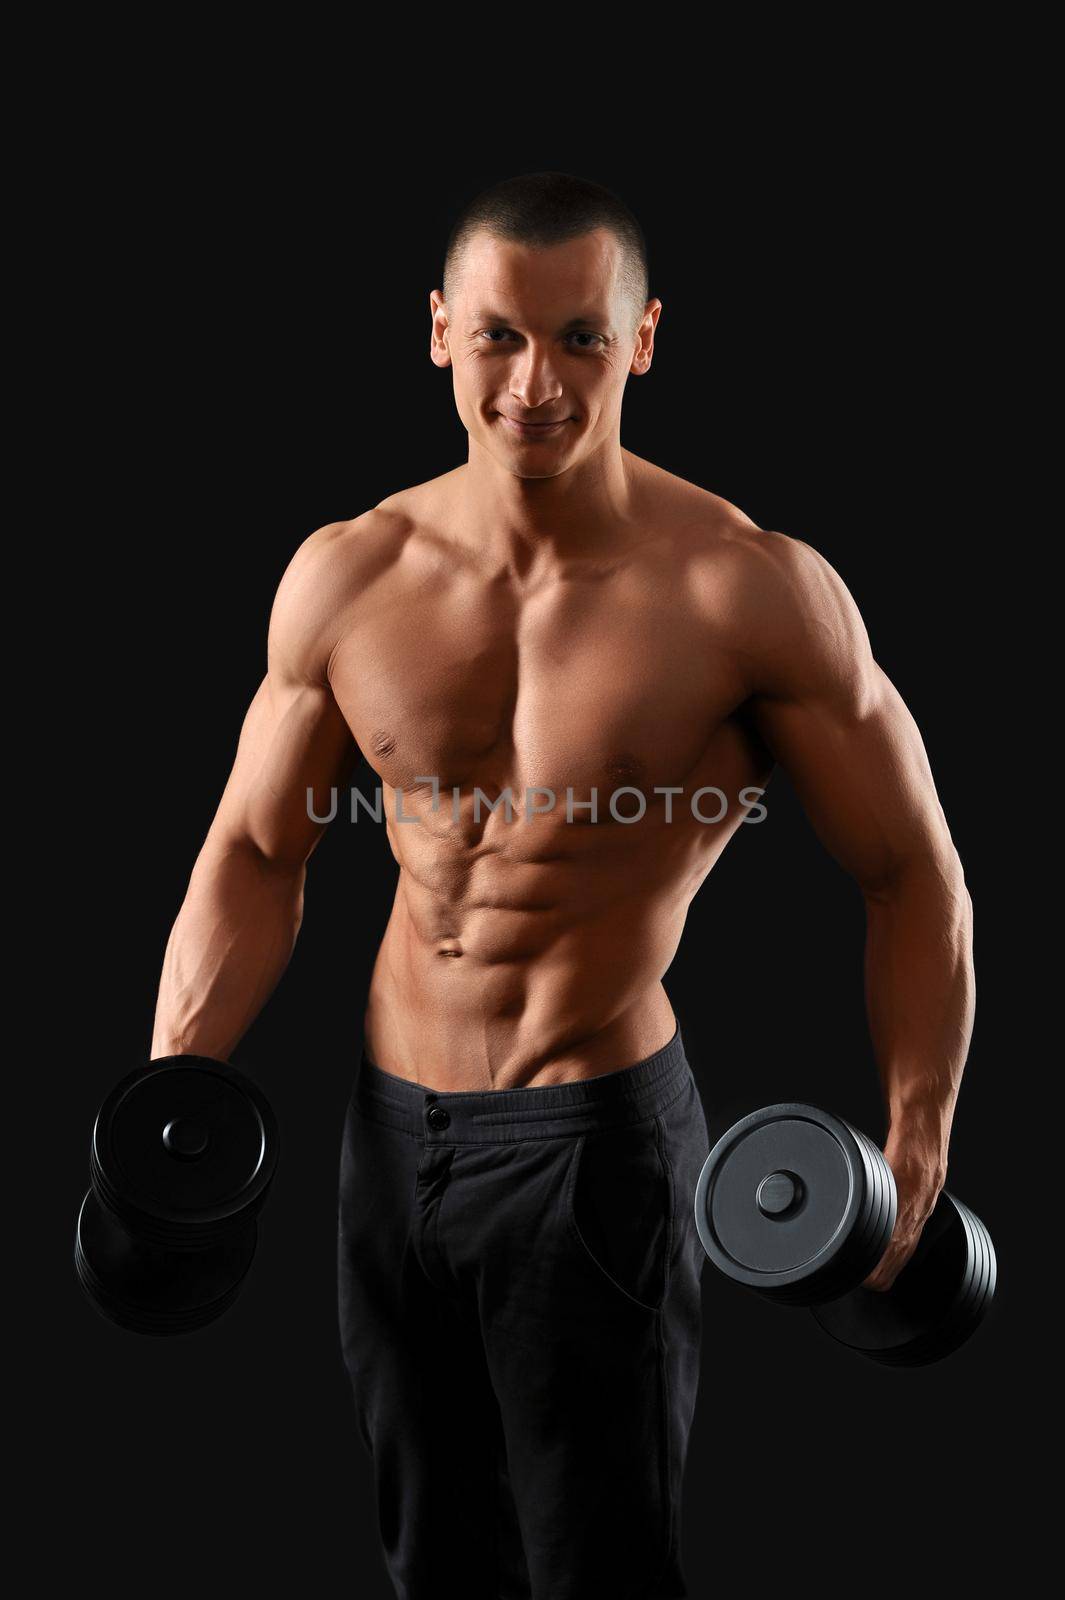 Tuned body. Studio portrait of a young handsome fitness man posing with a dumbbell showing off his stunning muscled torso on dark background